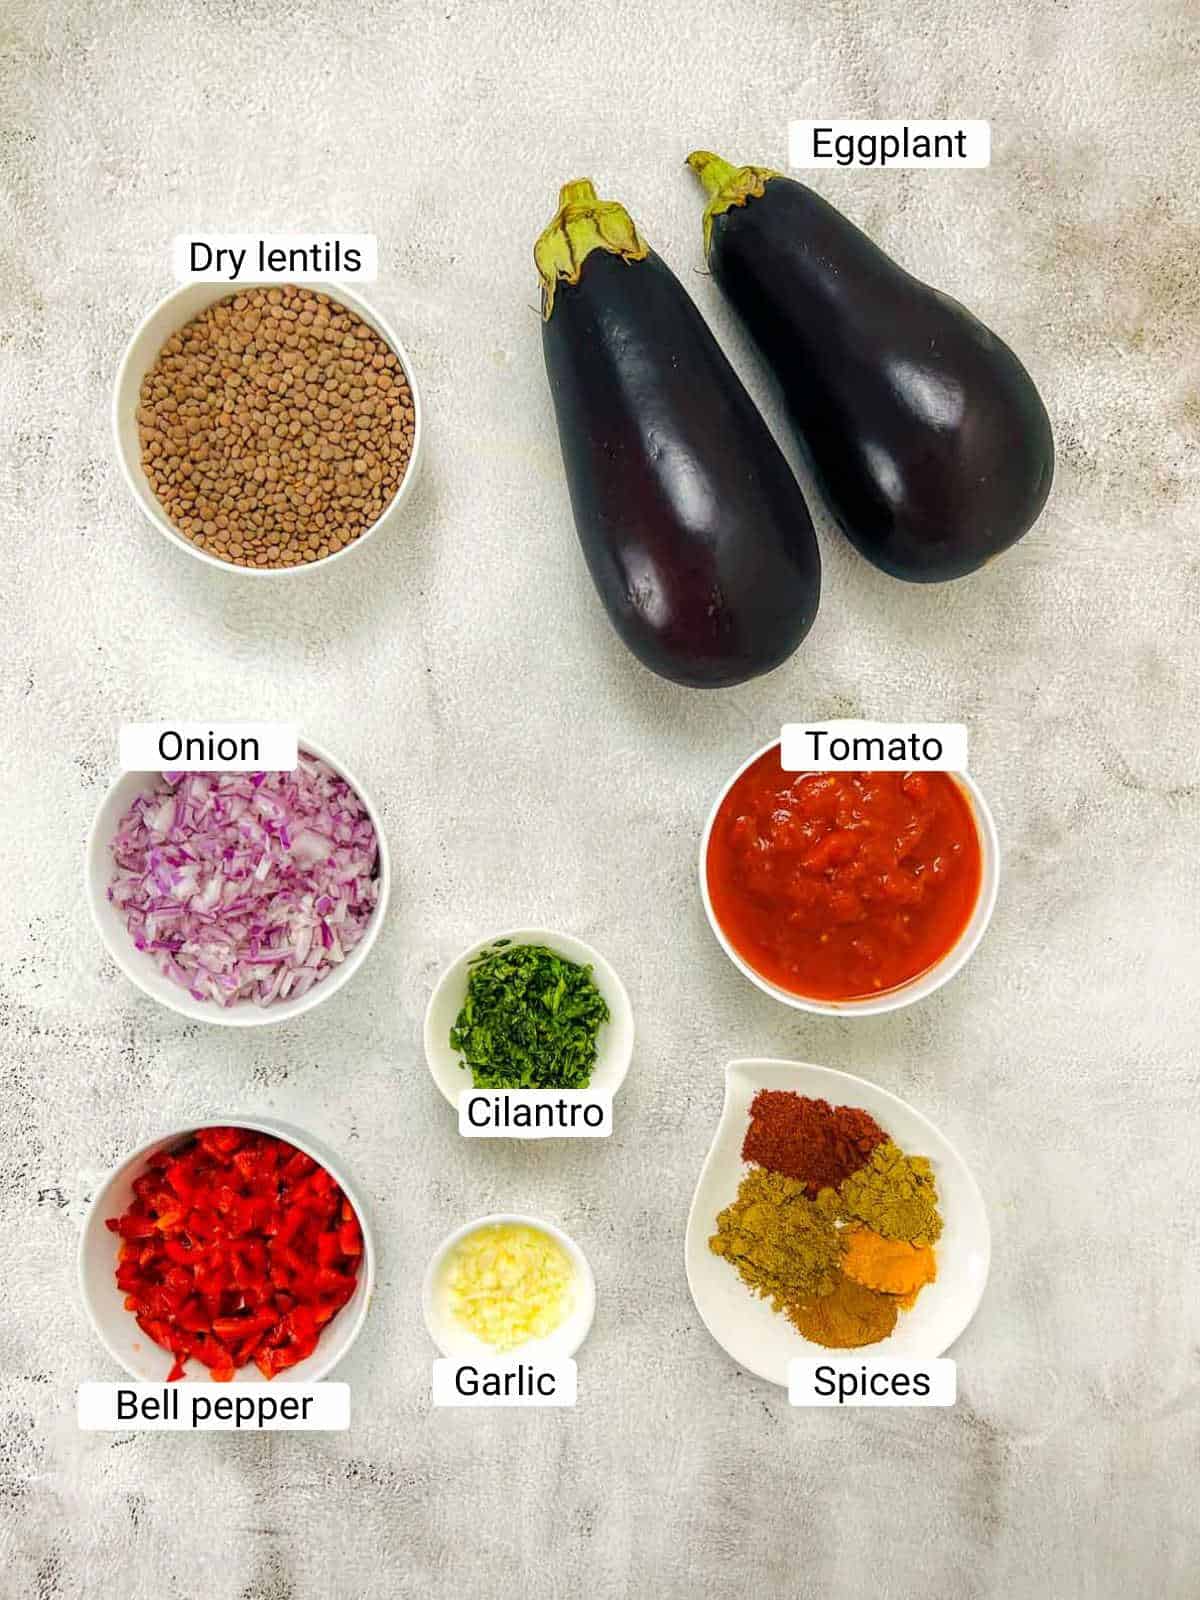 Ingredients to make lentil stuffed eggplants on a white surface.